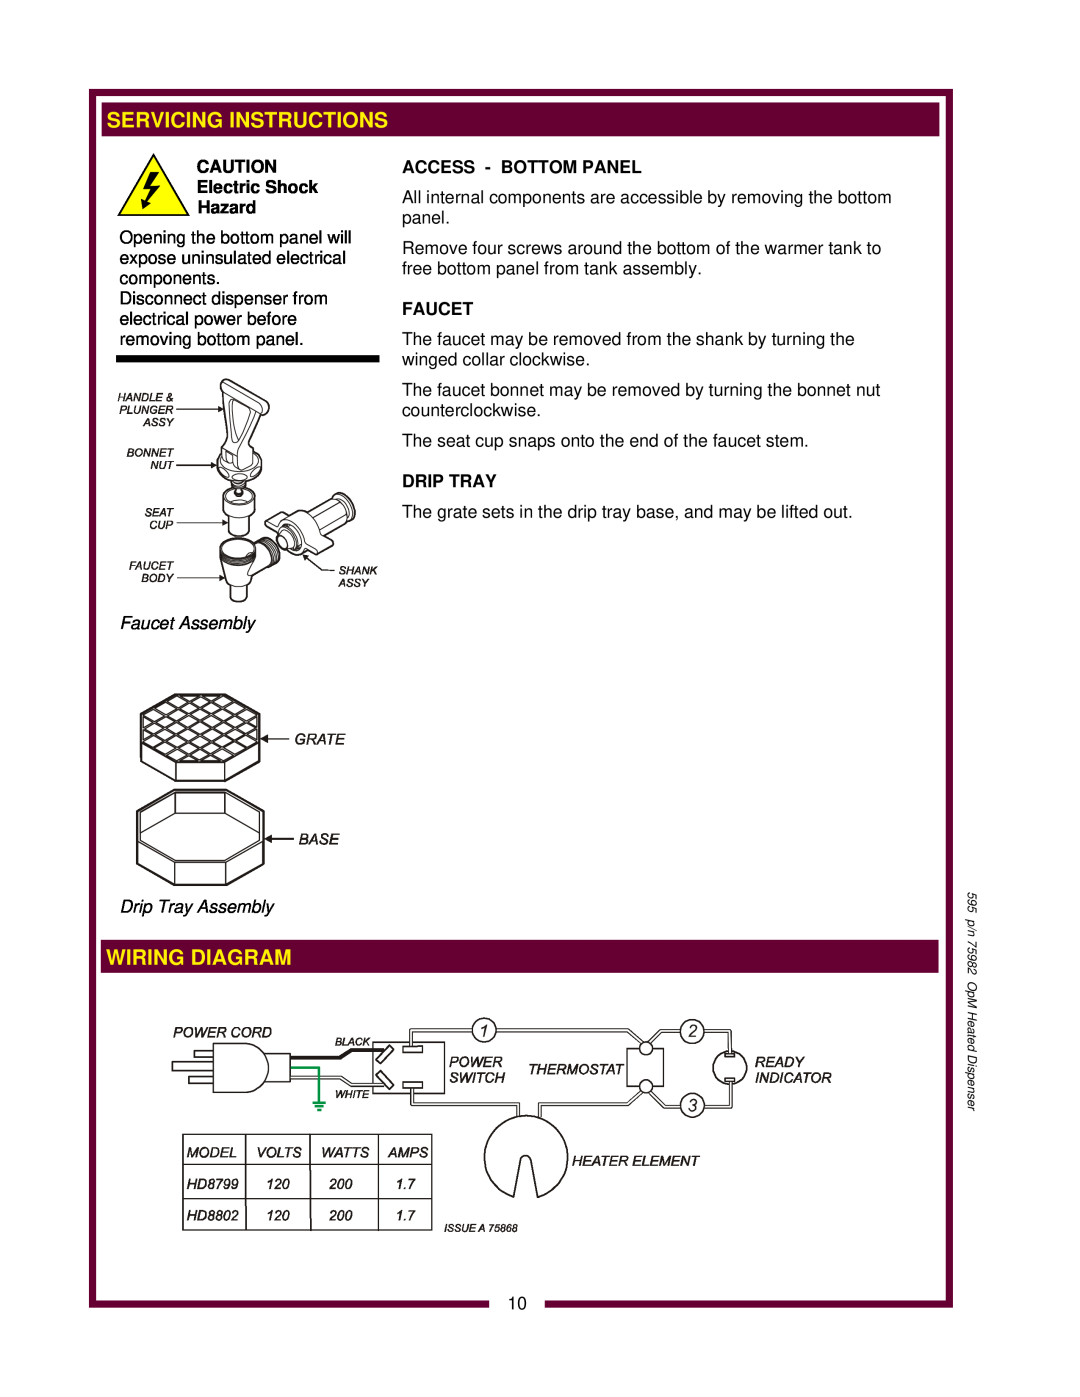 Wells HD8799, HD8802 Servicing Instructions, Wiring Diagram, Faucet Assembly Drip Tray Assembly, Electric Shock Hazard 